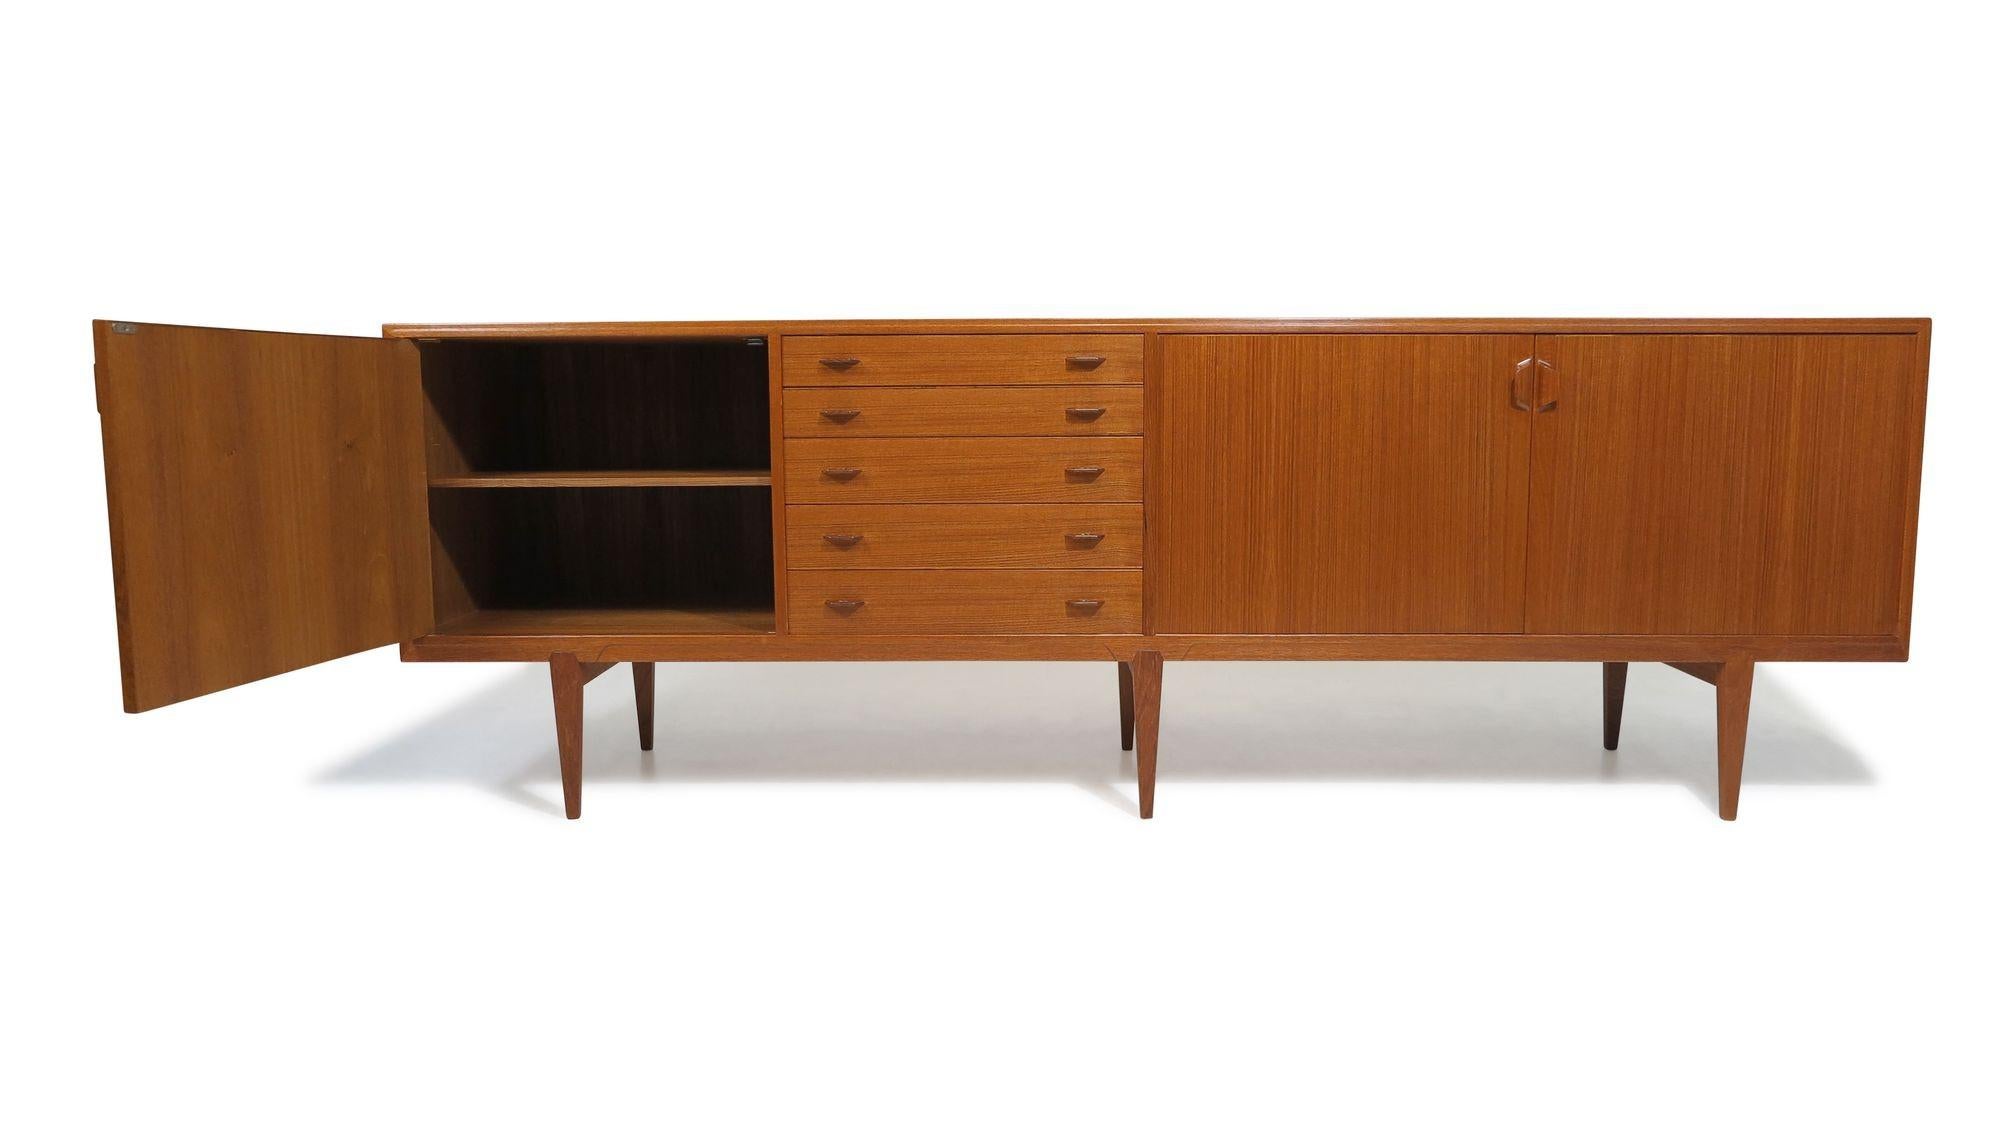 Danish Credenza designed by Henry Rosengren Hansen for Brande Møbelfabrik, Denmark,1955. This impressive 94.5” long credenza is expertly handcrafted from old-growth teak, highlighting the fine joinery characteristic of early Danish furniture design.